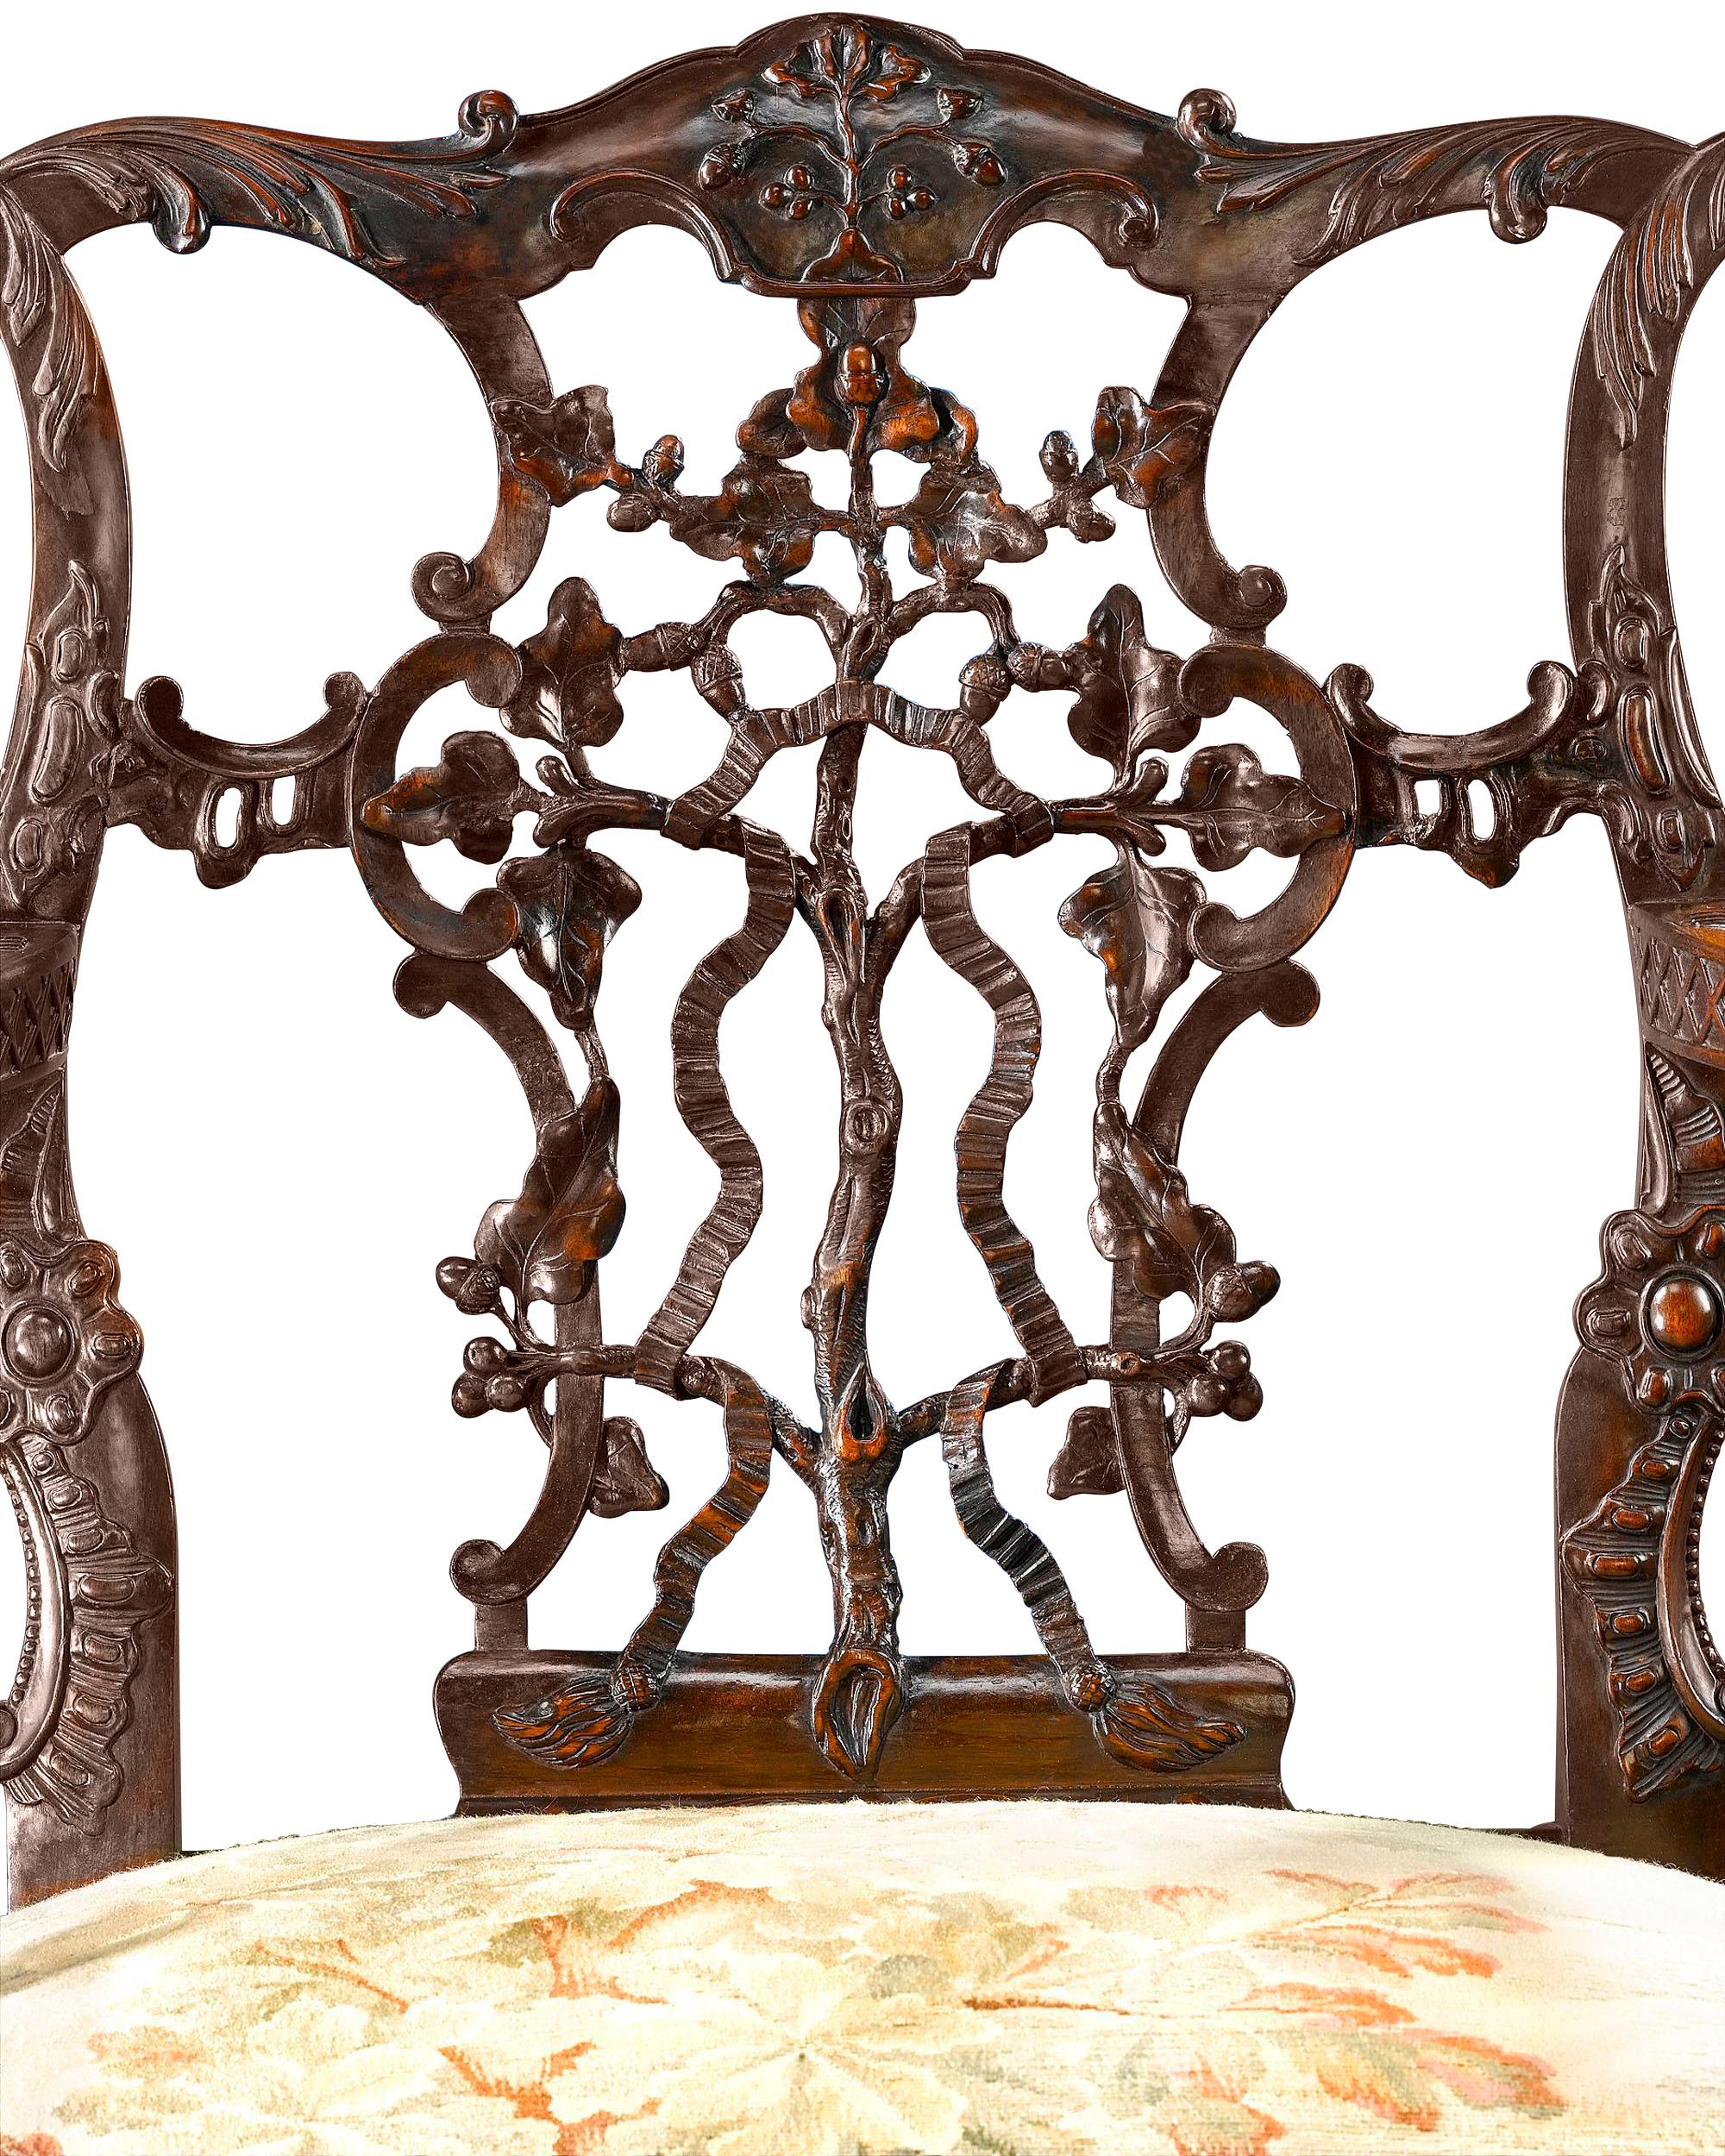 A magnificent 19th-century mahogany arm chair crafted in the George II taste. From the pierced, intertwined ribbon back and duck-form armrests to the hairy ball-and-claw feet, the quality of carving is deep and richly detailed. The seat is